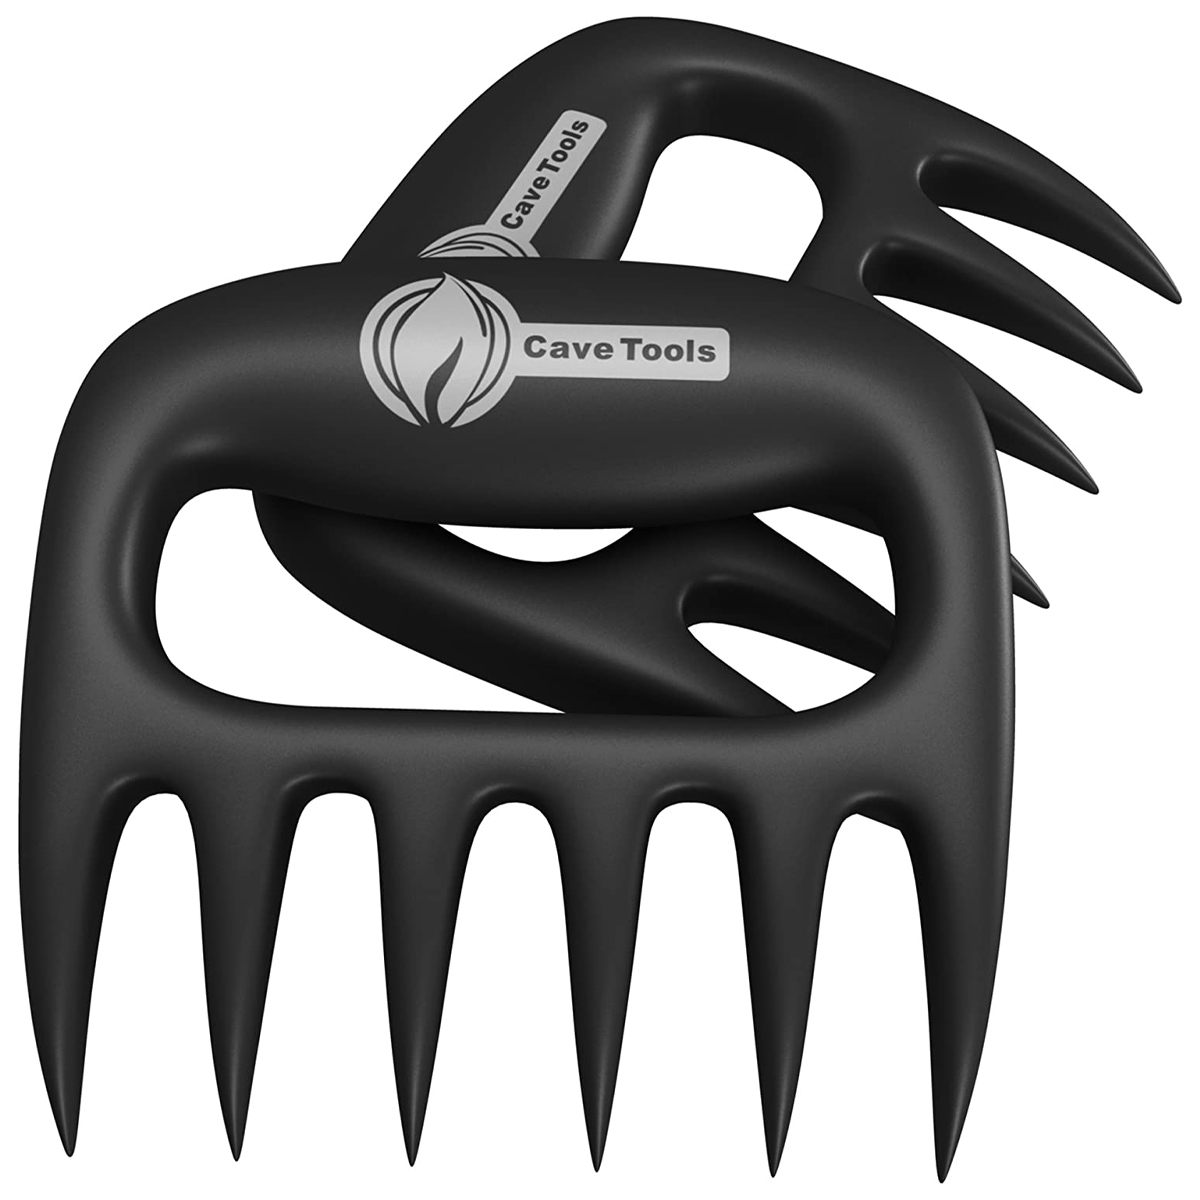 Cave Tools Polycarbonate Meat Claws for Grilling Cooking, Shred Handle Carve BBQ and Grill Meats - image 1 of 6